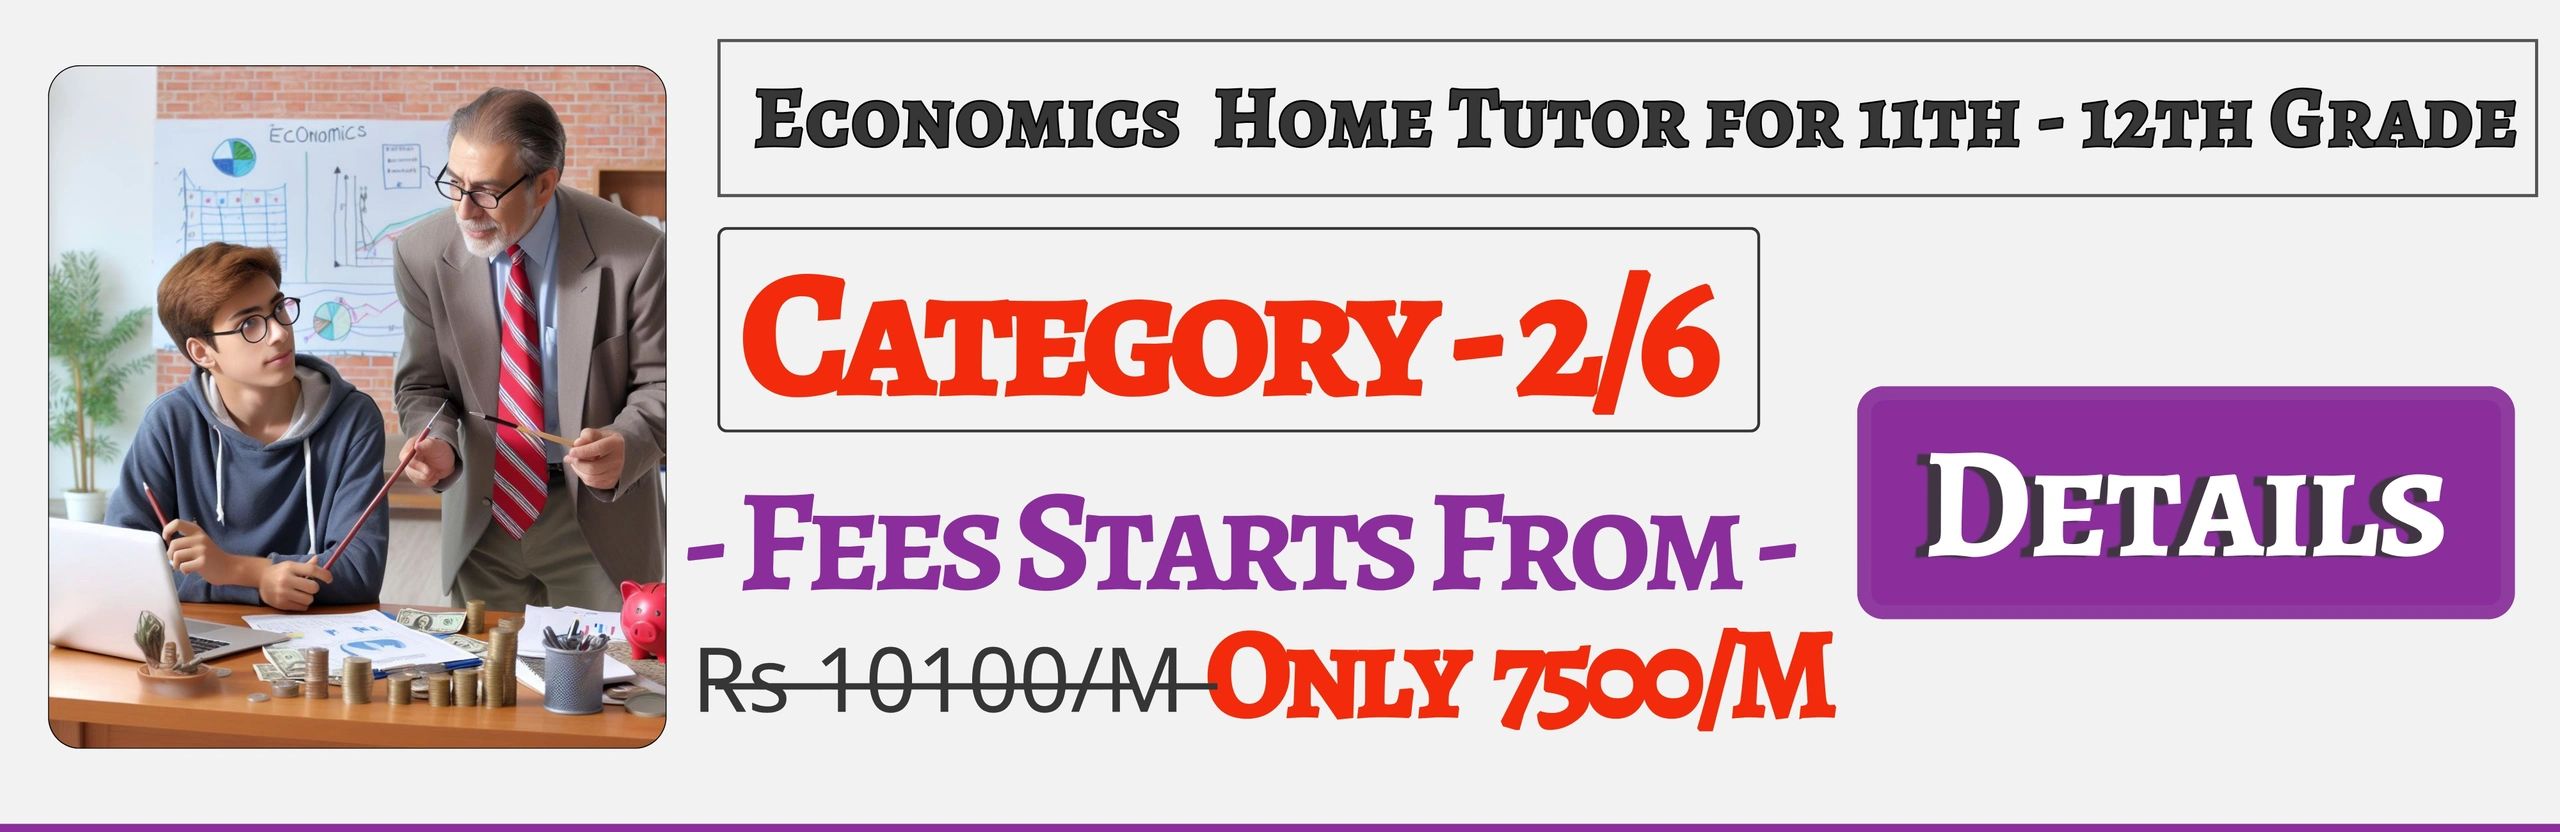 Book Best Nearby Economics Home Tuition Tutors For 11th & 12th Jaipur ,Fees Only 7500/M